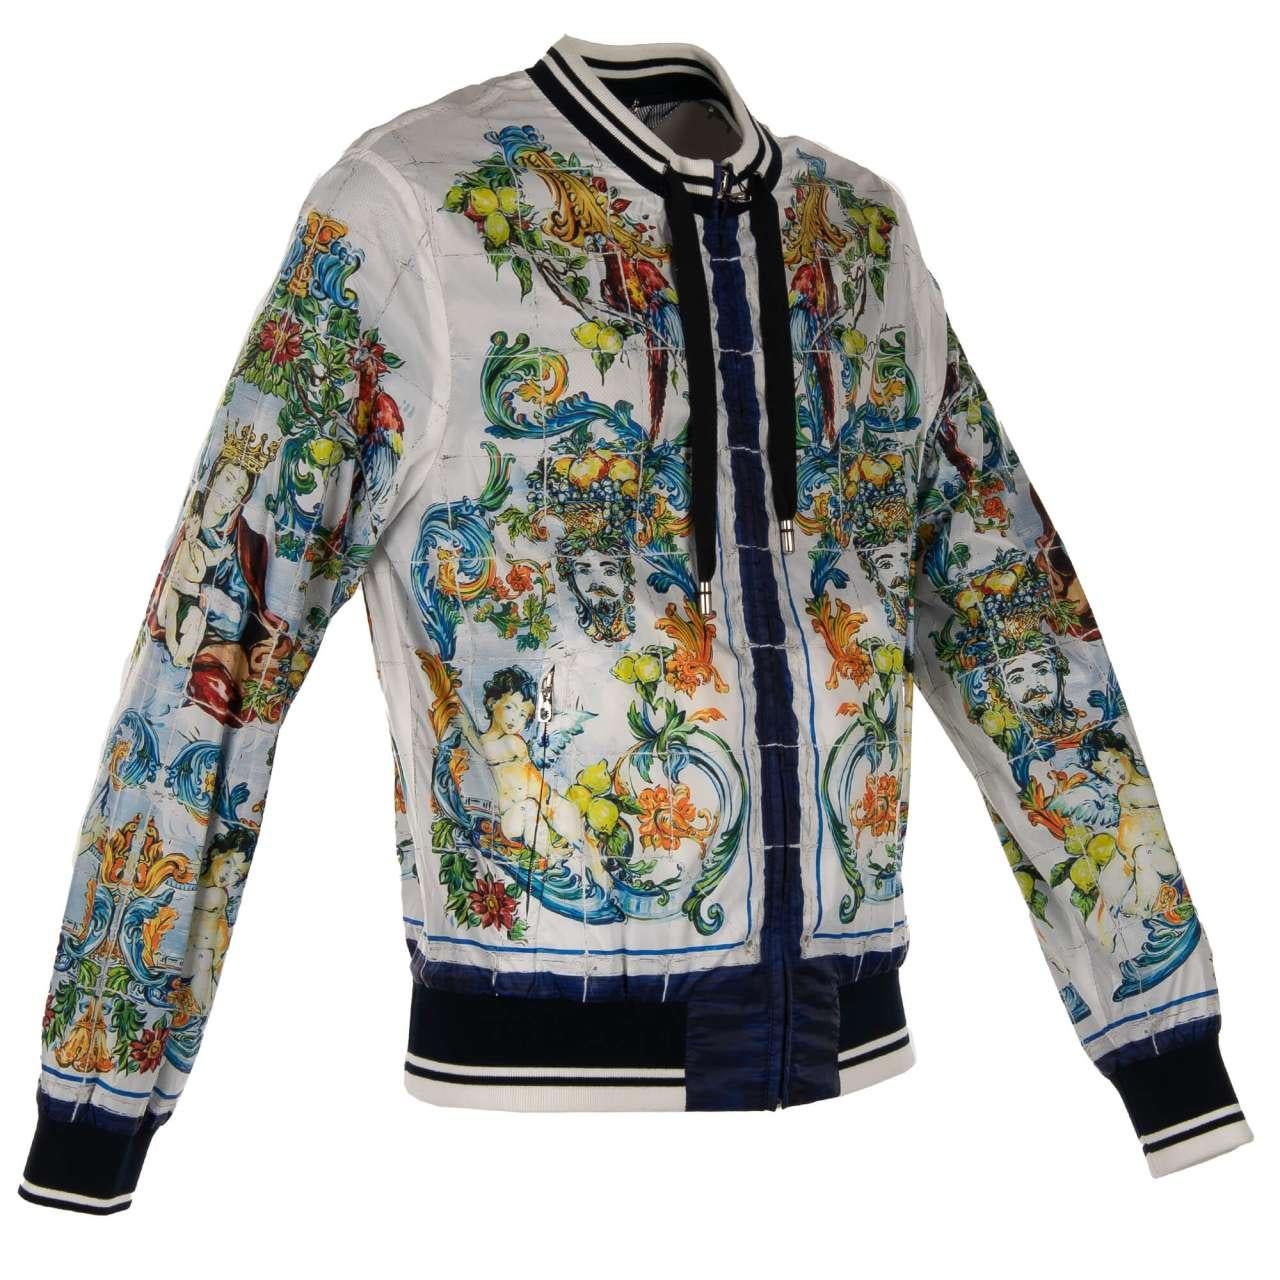 Dolce & Gabbana - Majolica Baroque Printed Bomber Jacket Blue White 58 In Excellent Condition For Sale In Erkrath, DE